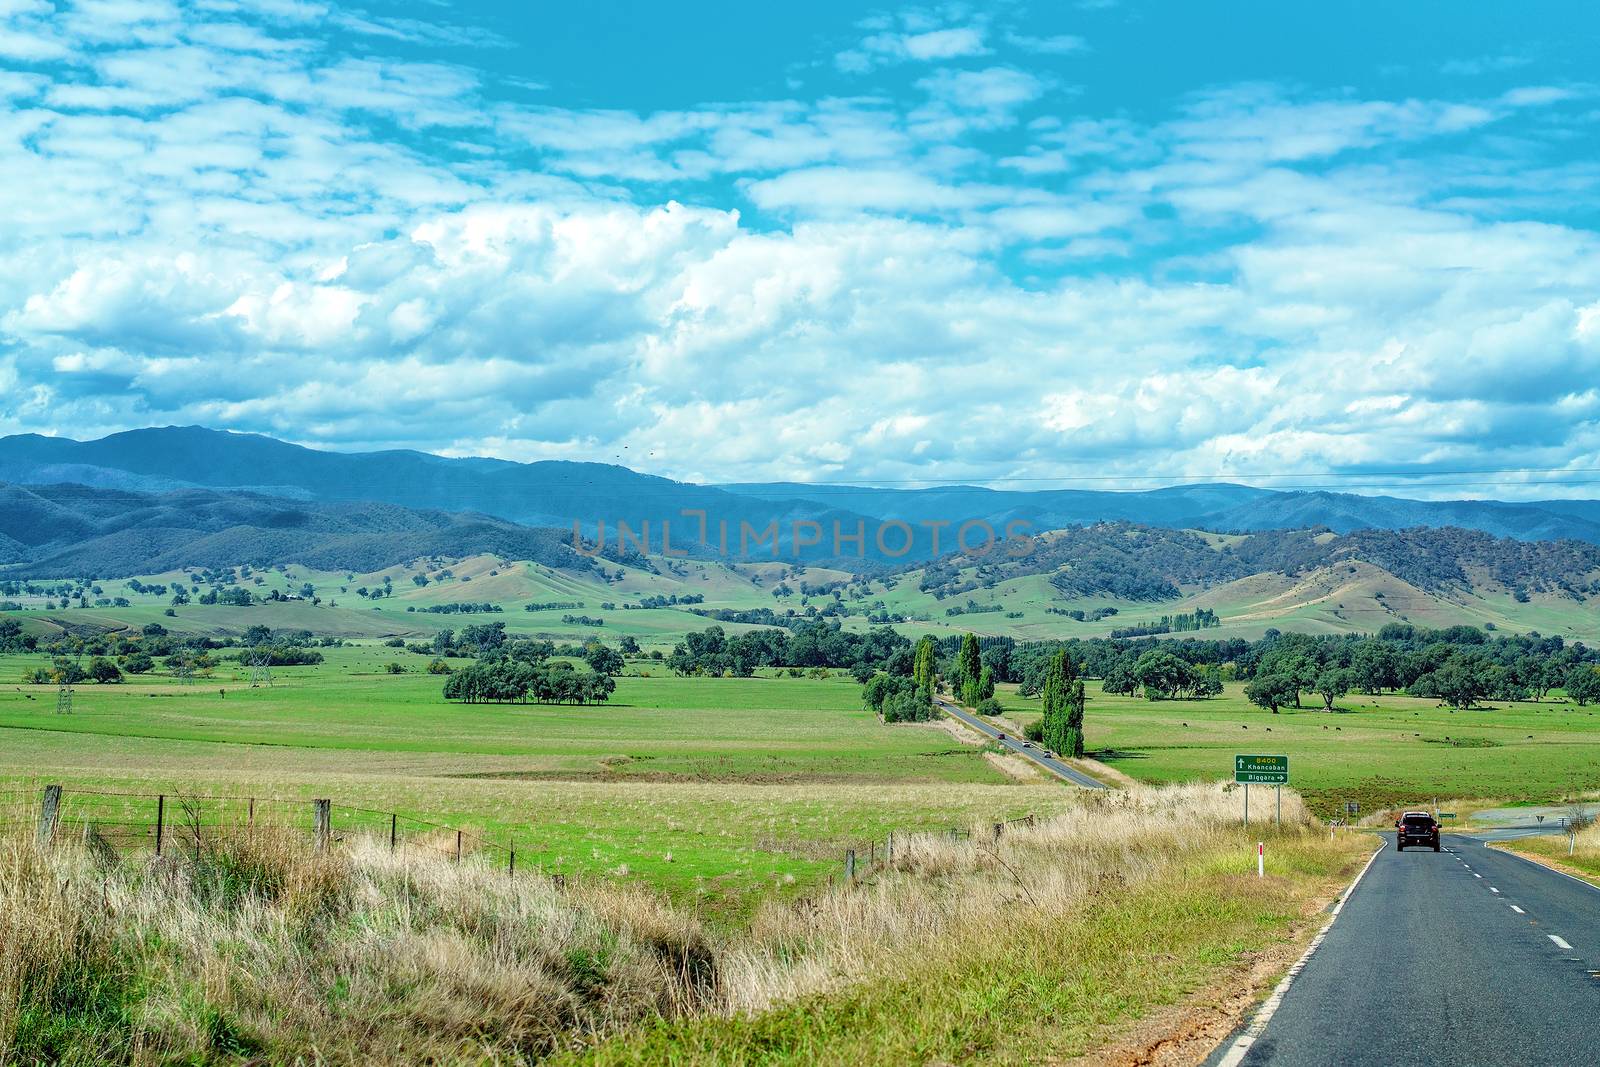 Road Trip - The Australian countryside in rural New South Wales